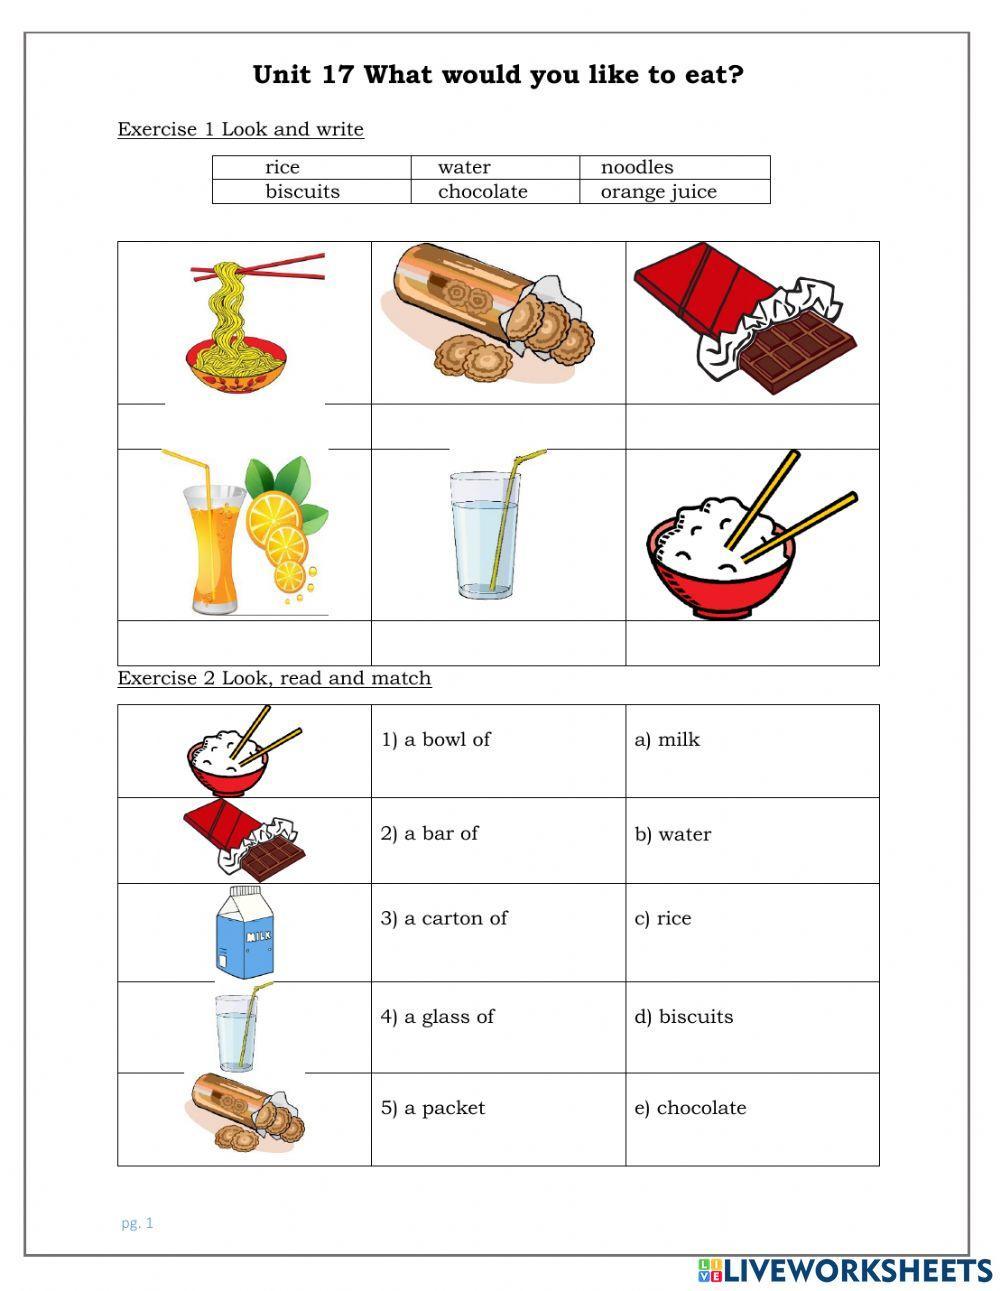 English 5 - Unit 17: What would you like to eat?